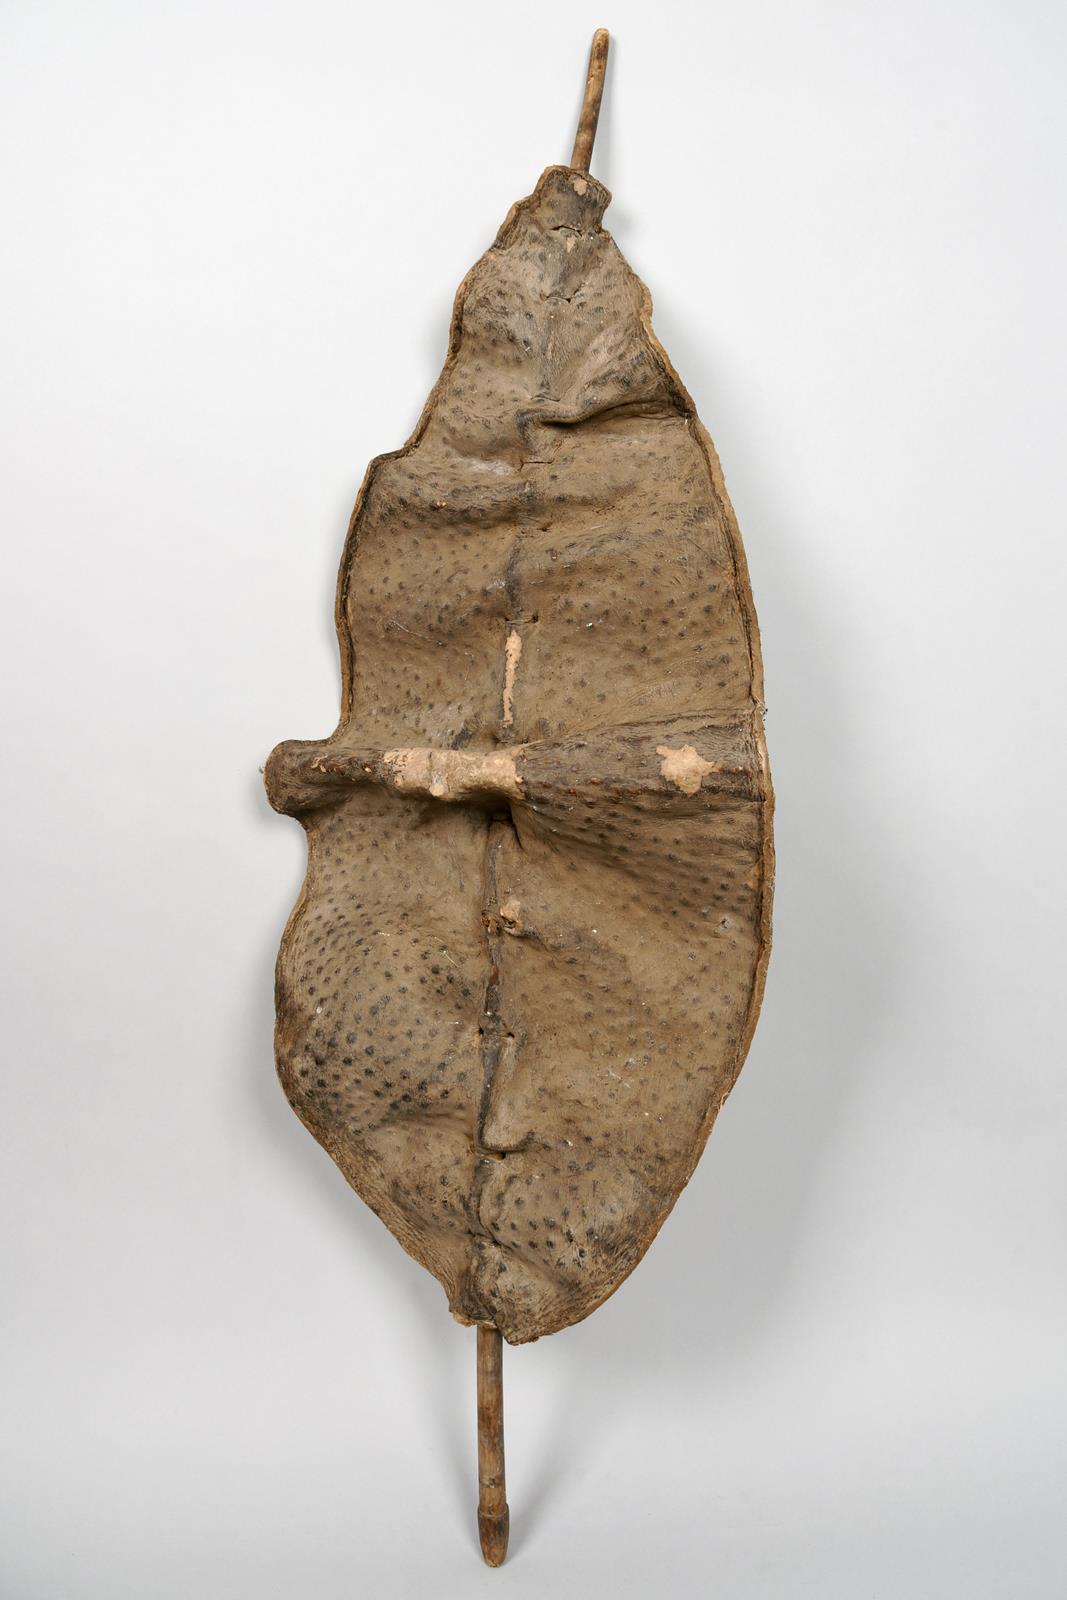 A Dinka shield South Sudan hide with embossed dimples and with a wooden shaft, 139.5cm long.